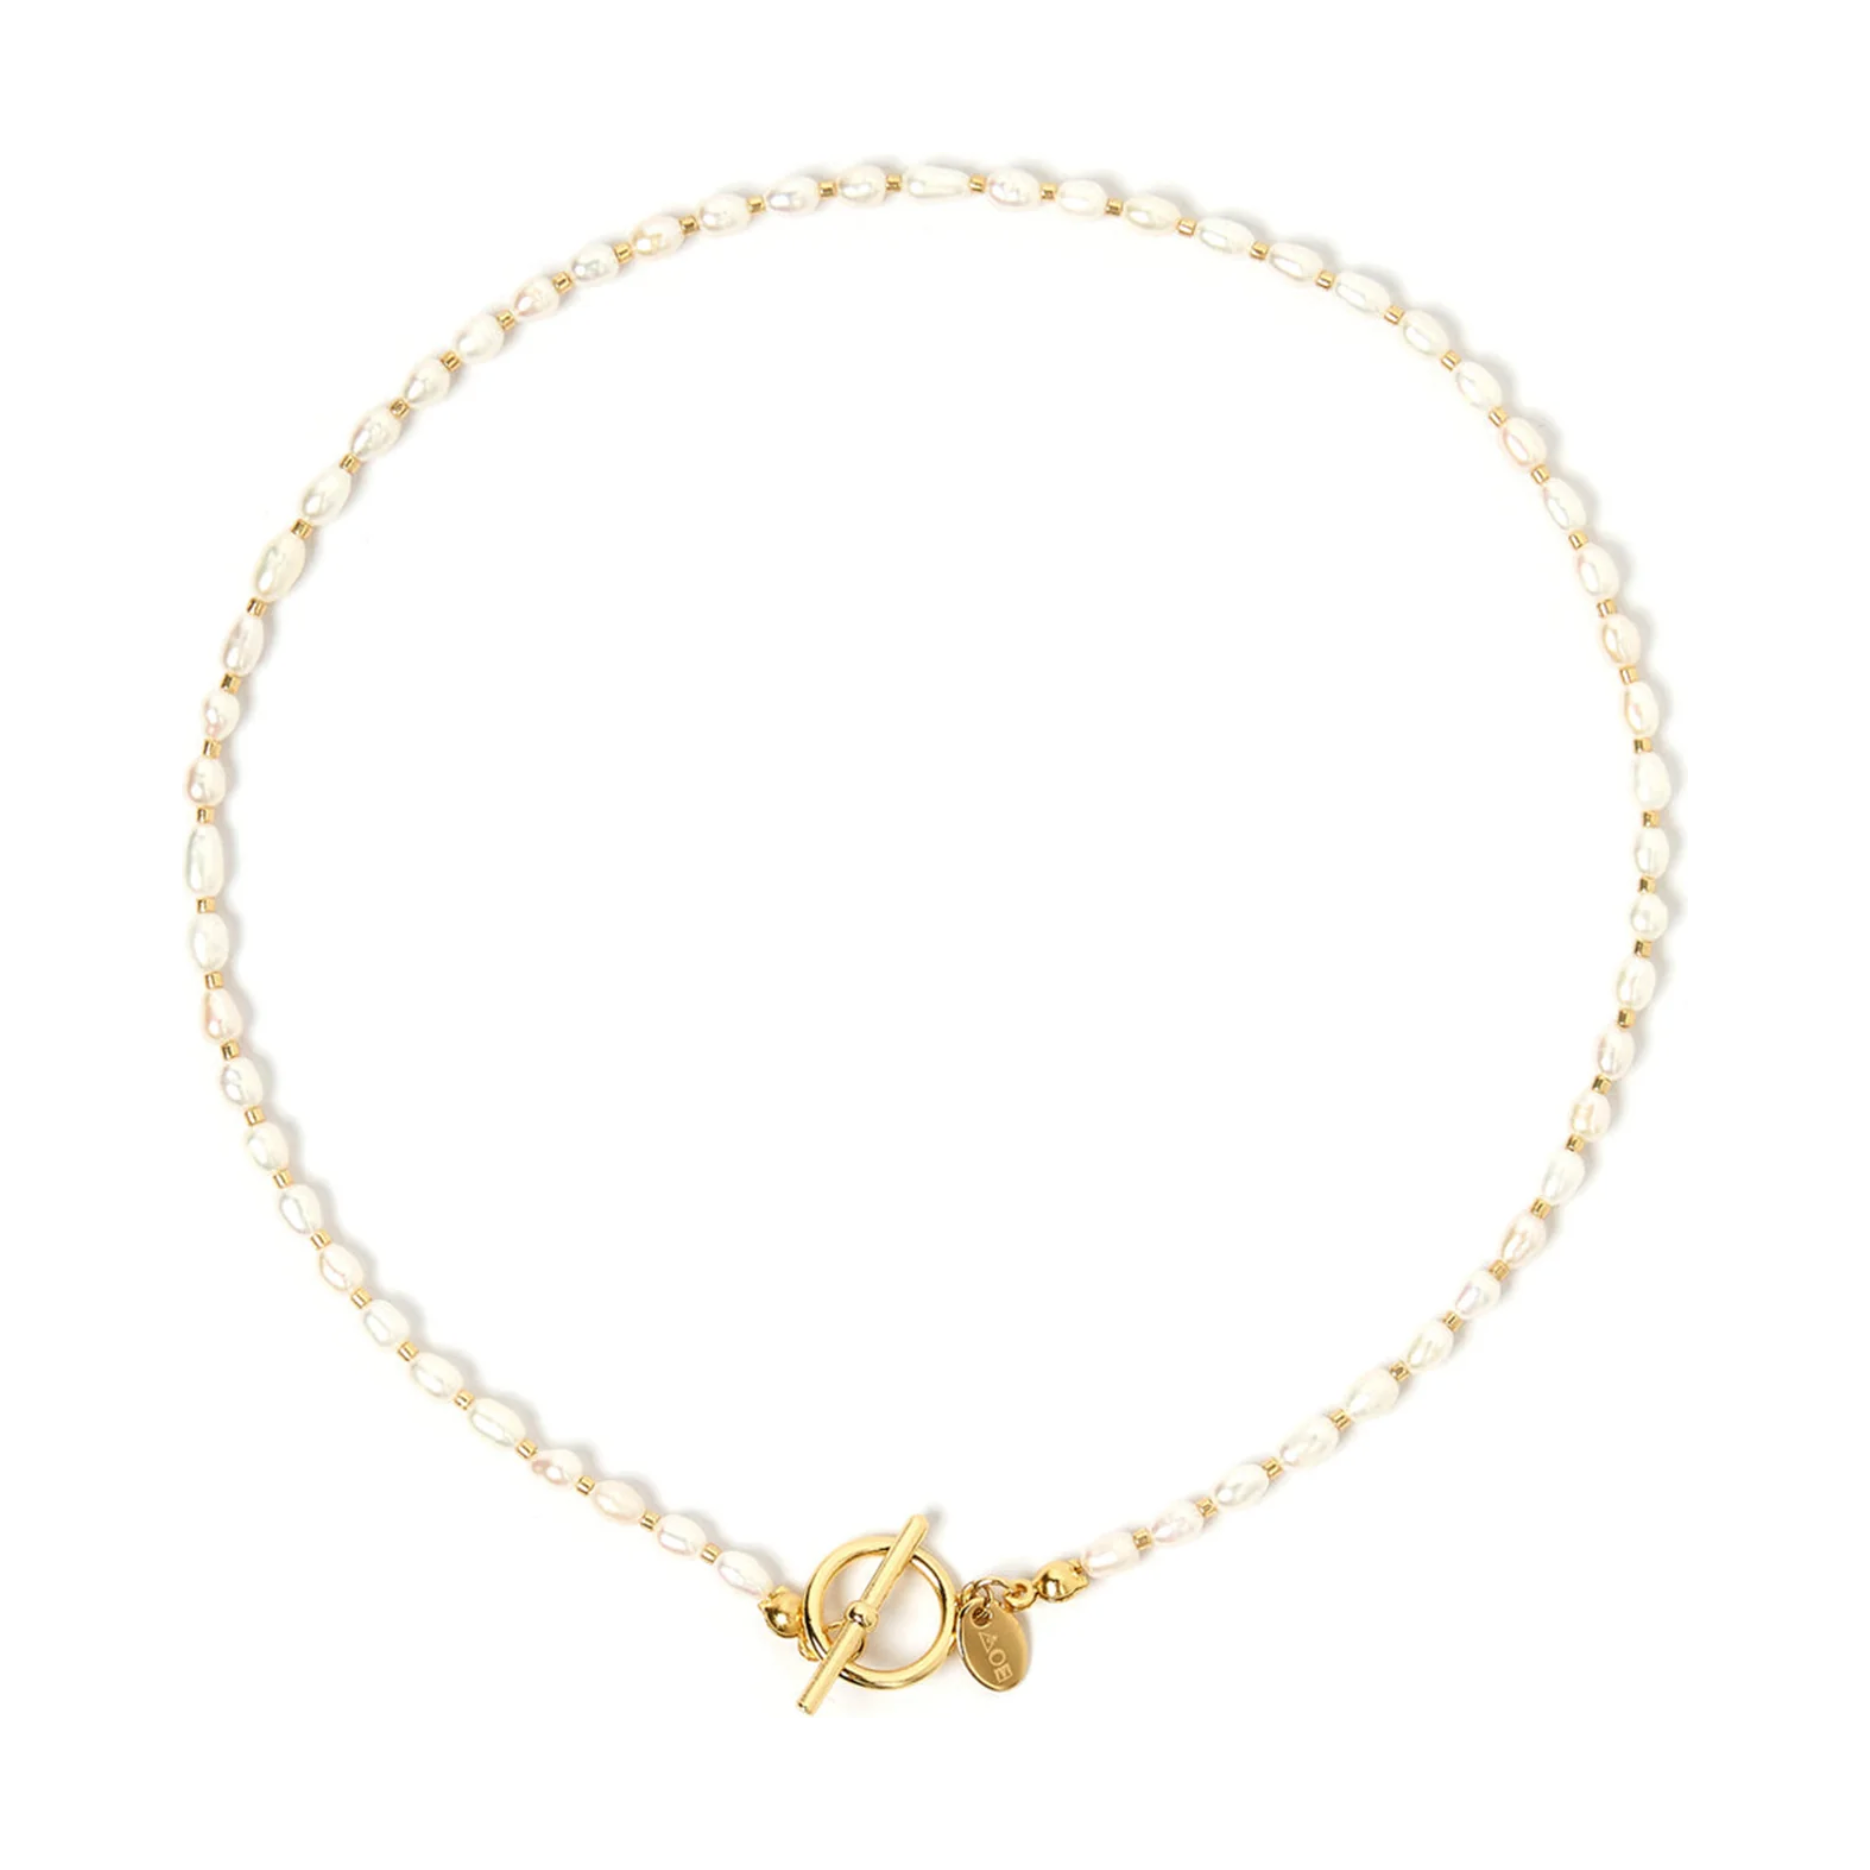 Arms of Eve Bahamas Pearl Necklace